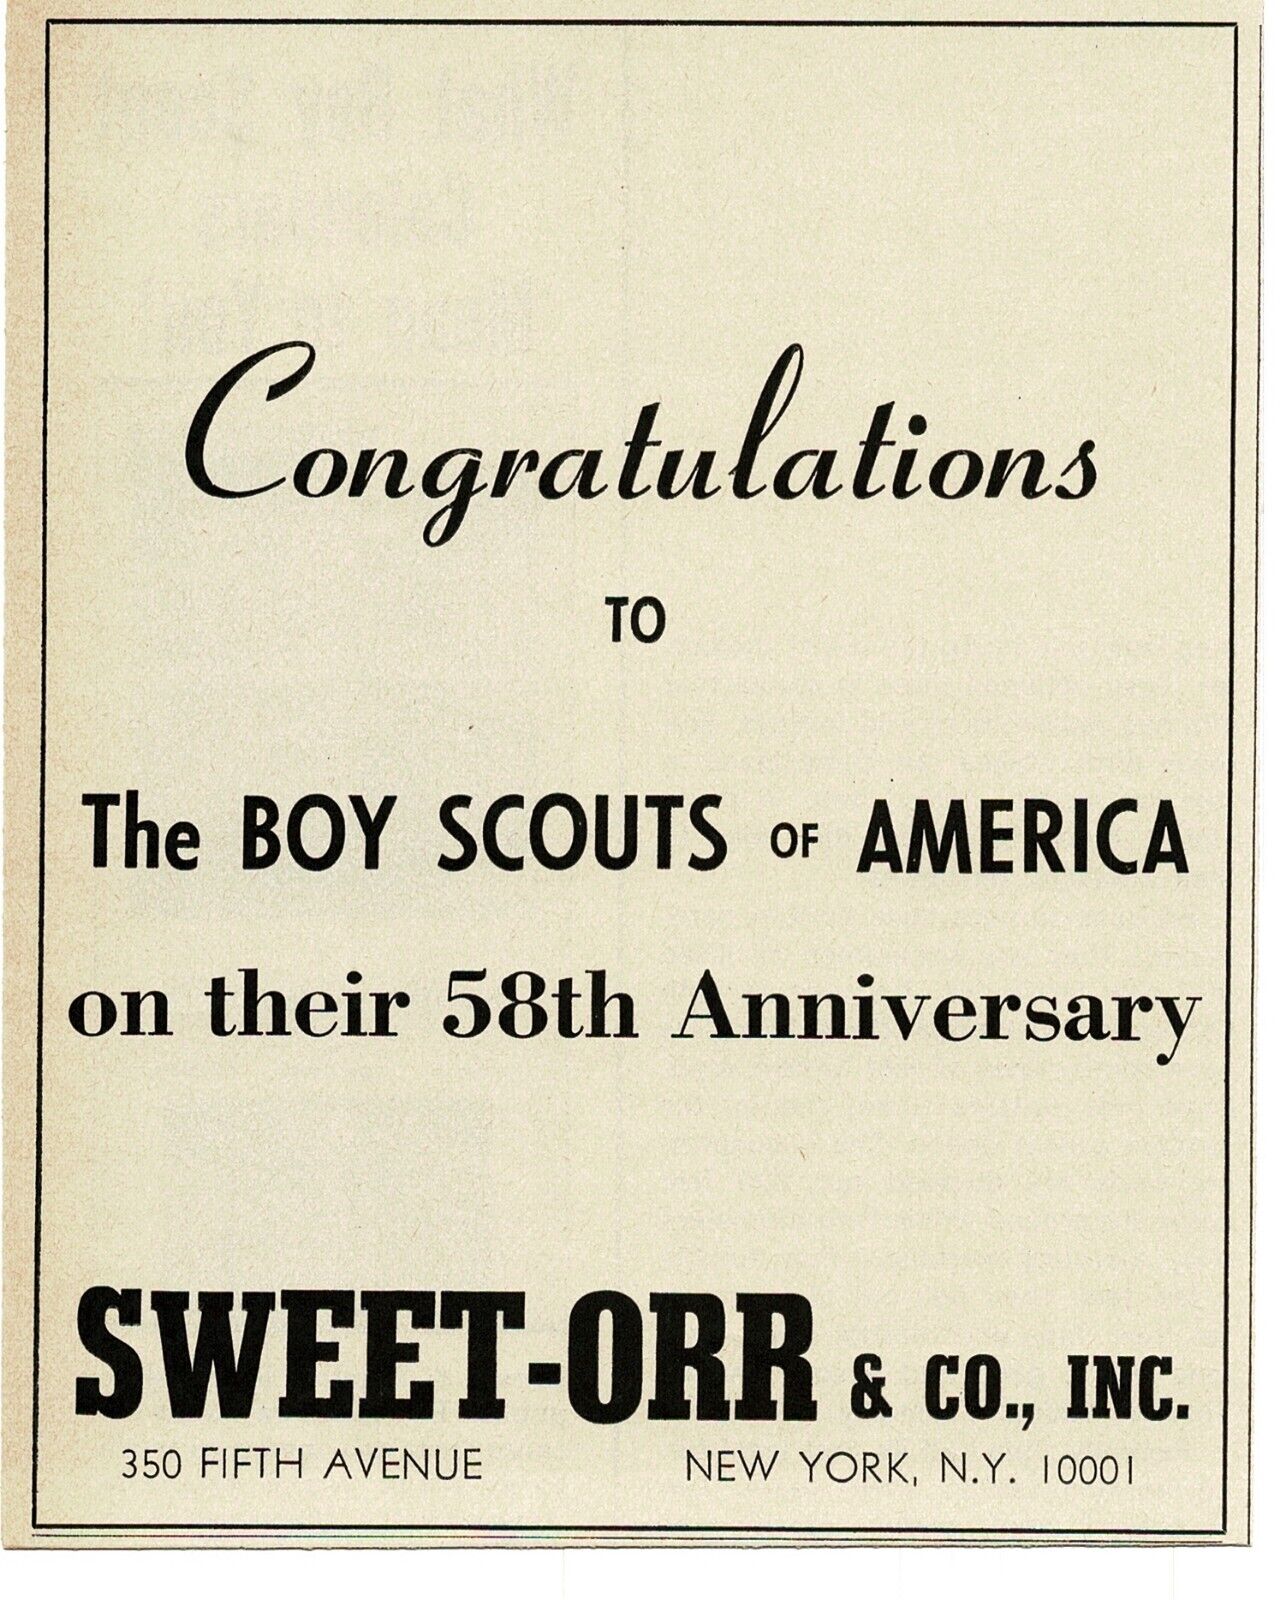 1968 SWEET-ORR pants Congrats to Boy Scouts 58th Anniversary Vintage Print Ad